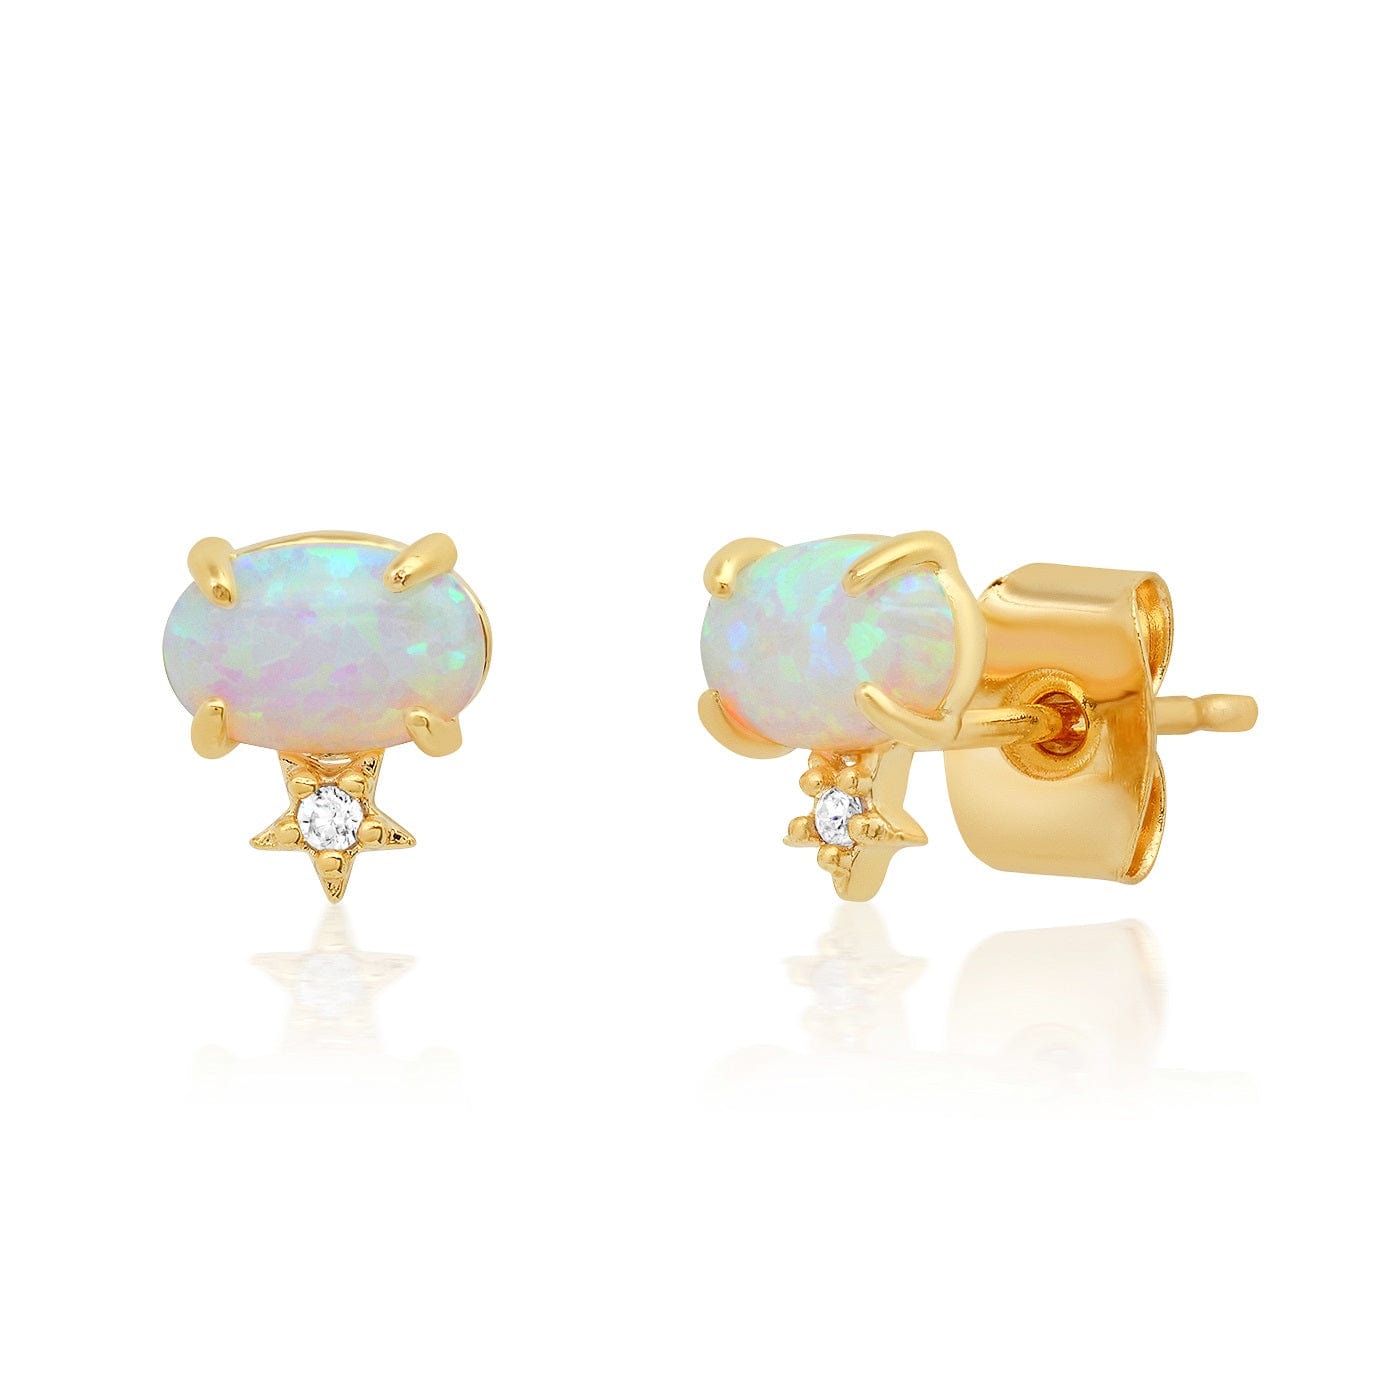 TAI JEWELRY Earrings Opal Oval Stud With Tiny Star Accent